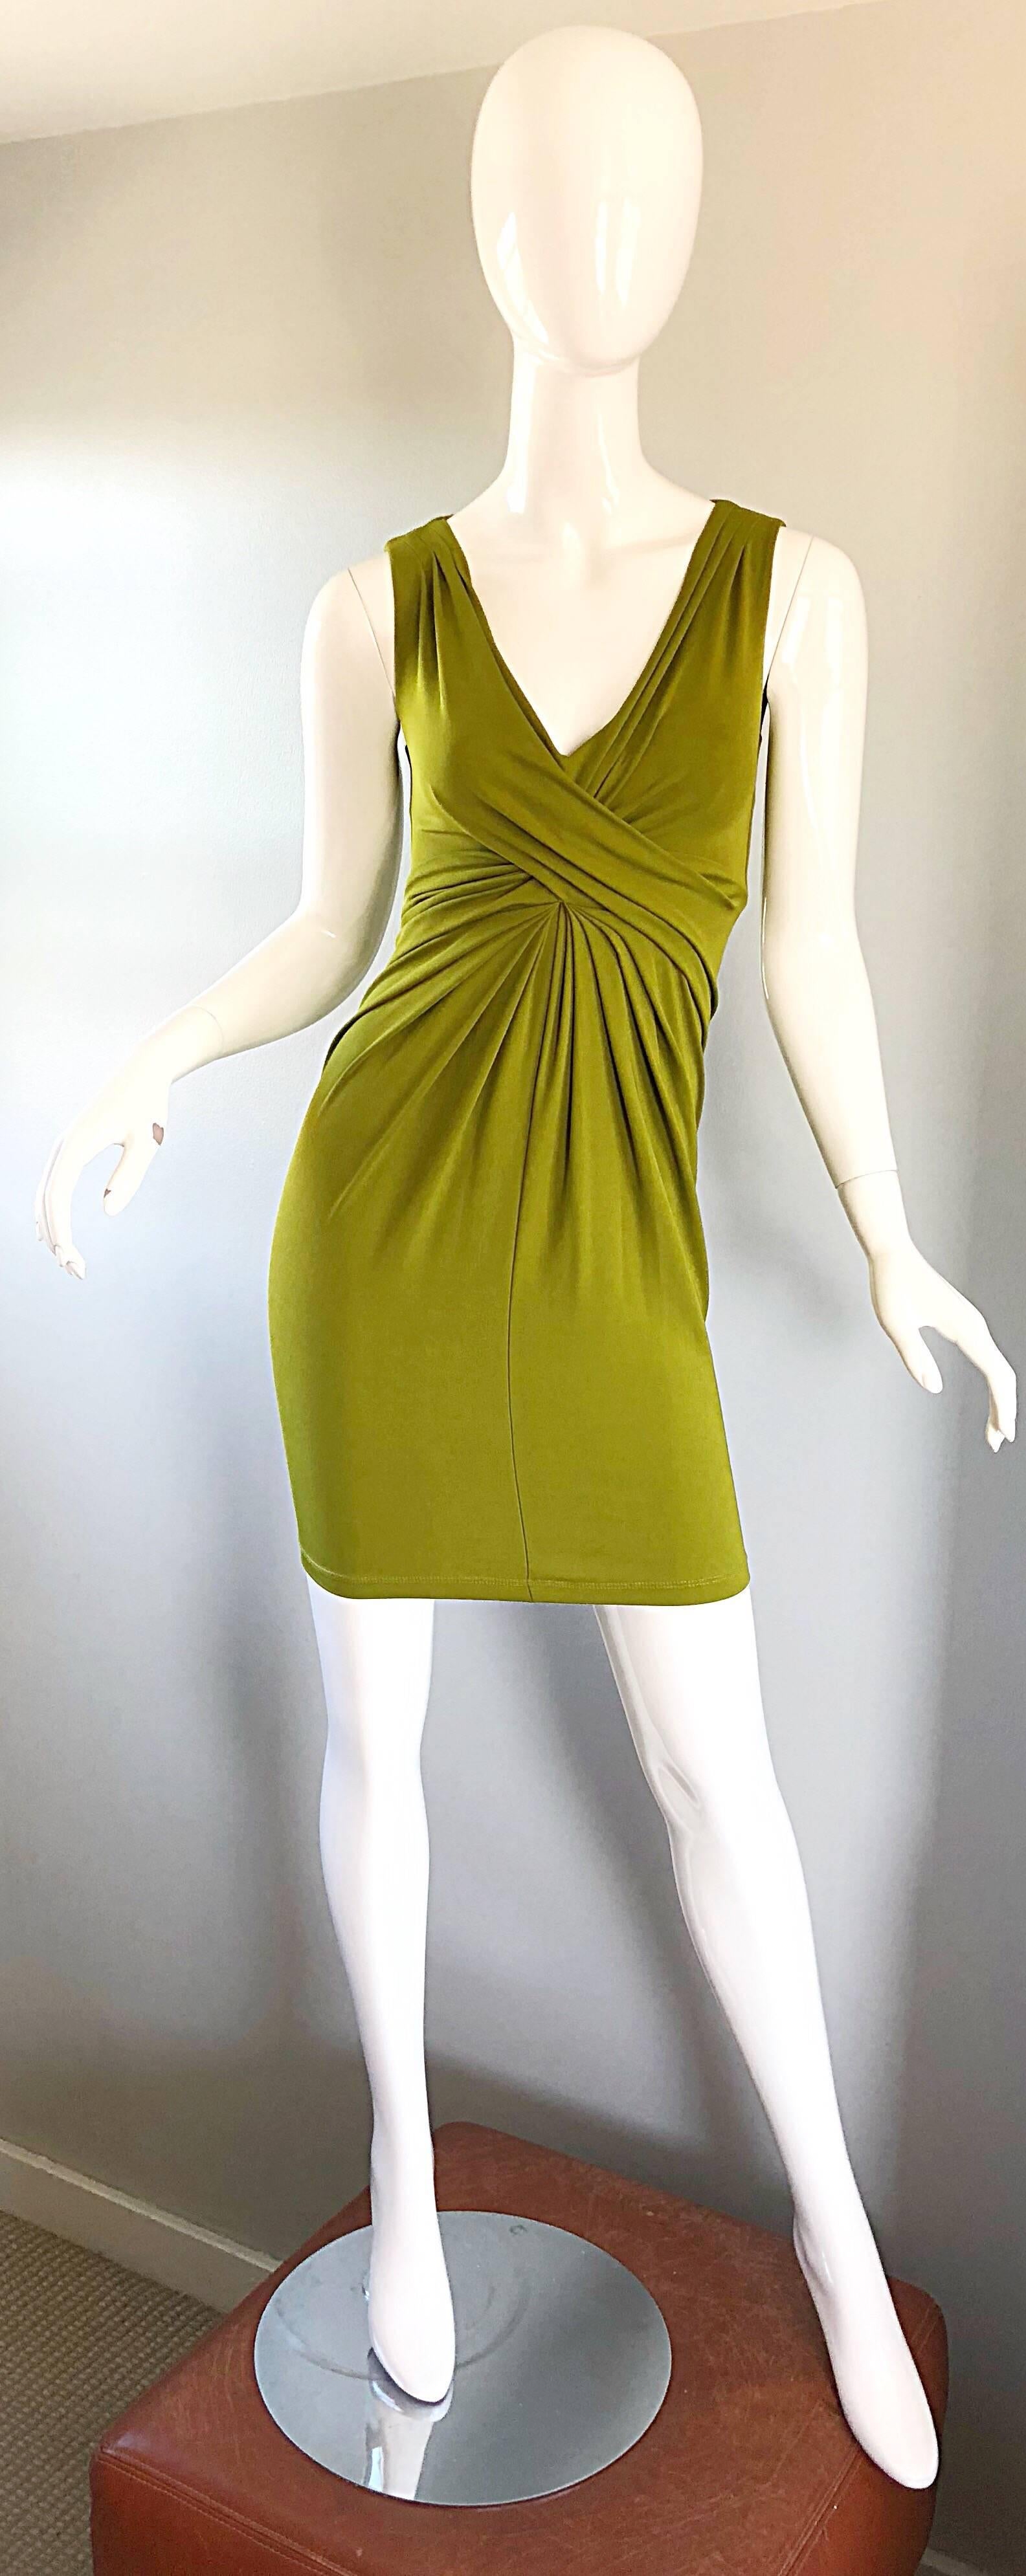 Beautiful early 2000s MICHAEL KORS COLLECTION chartreuse green silk jersey Grecian dress! Features a flattering silk jersey fabric that looks effortlessly chic on! Ruching hides any and all flaws. Hidden zipper up the side with hook-and-eye closure.